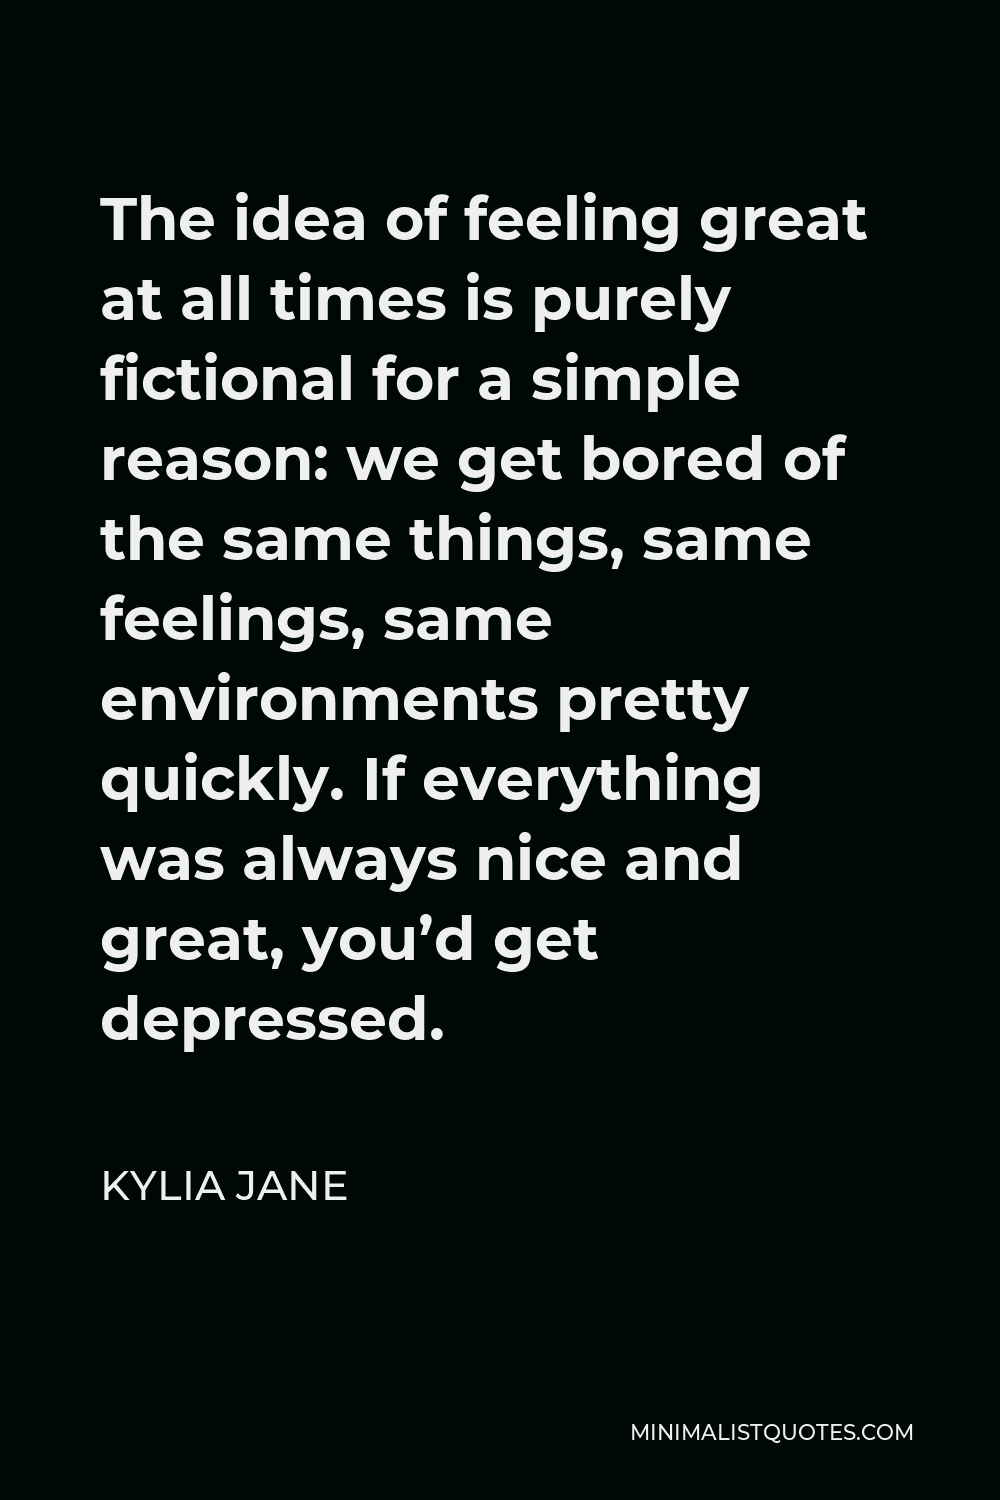 Kylia Jane Quote - The idea of feeling great at all times is purely fictional for a simple reason: we get bored of the same things, same feelings, same environments pretty quickly. If everything was always nice and great, you’d get depressed.